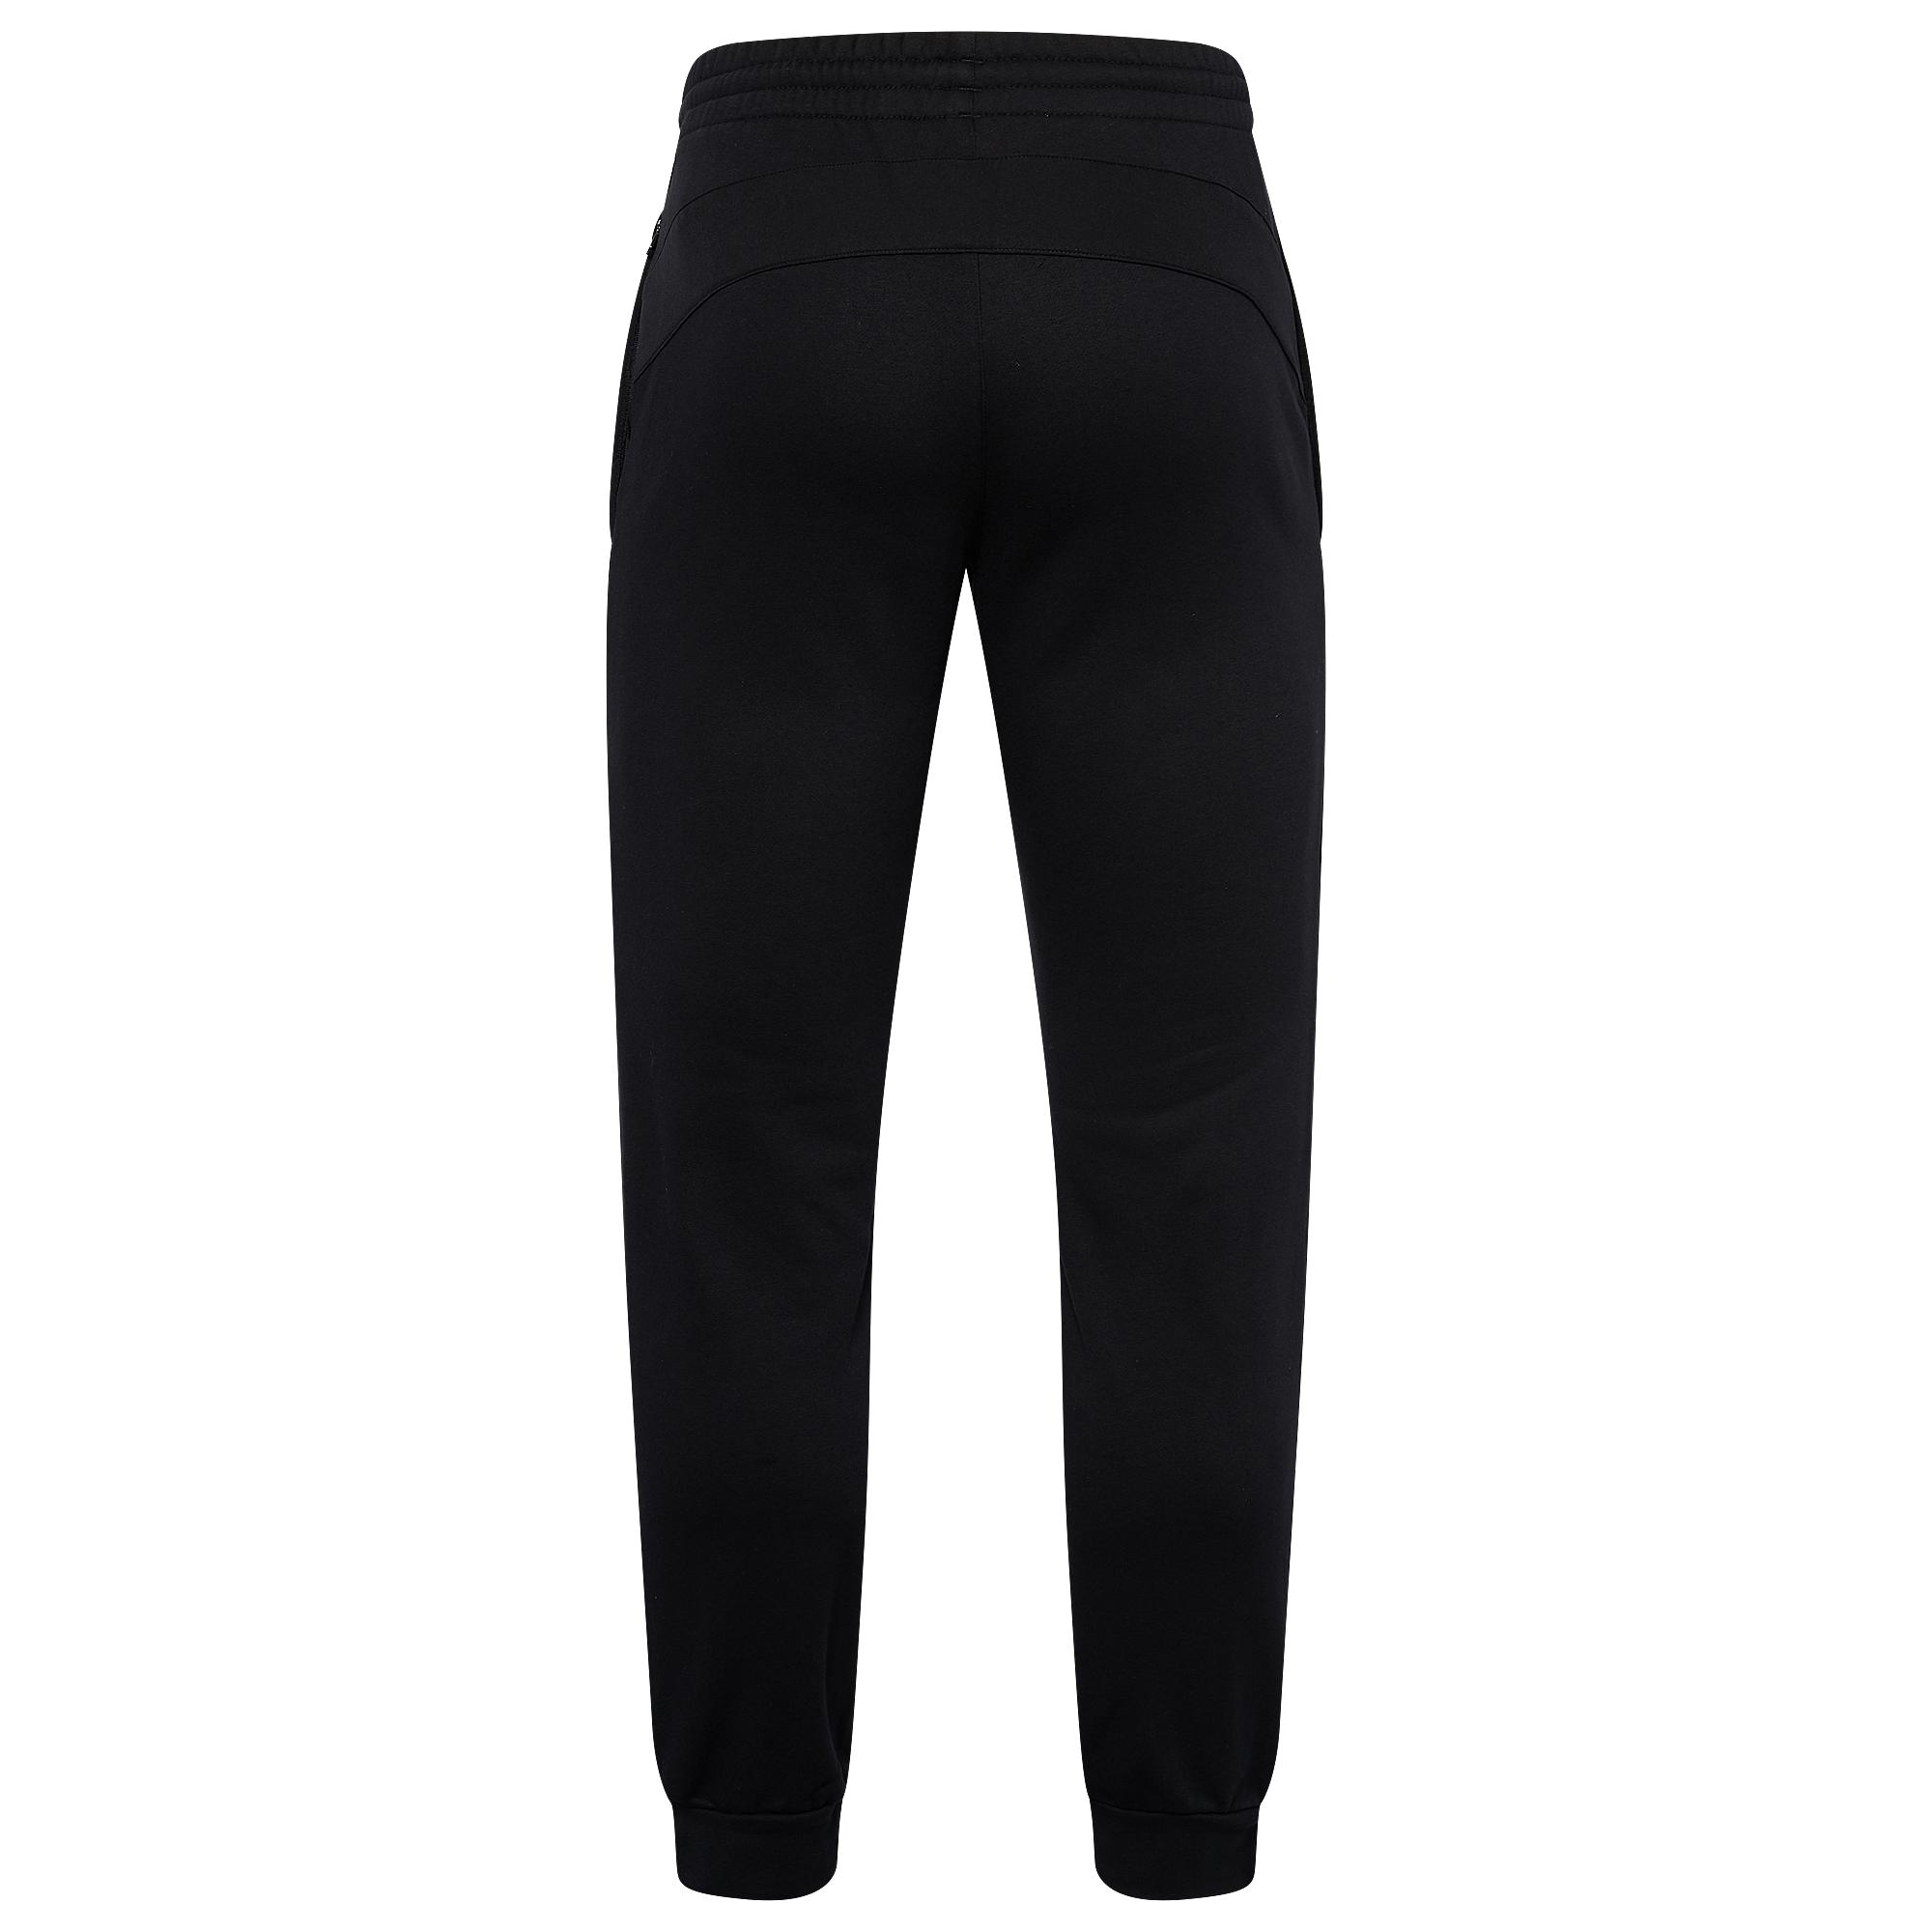 Adidas Br8 Pants Hot Sale, UP TO 64% OFF | www.npld.eu